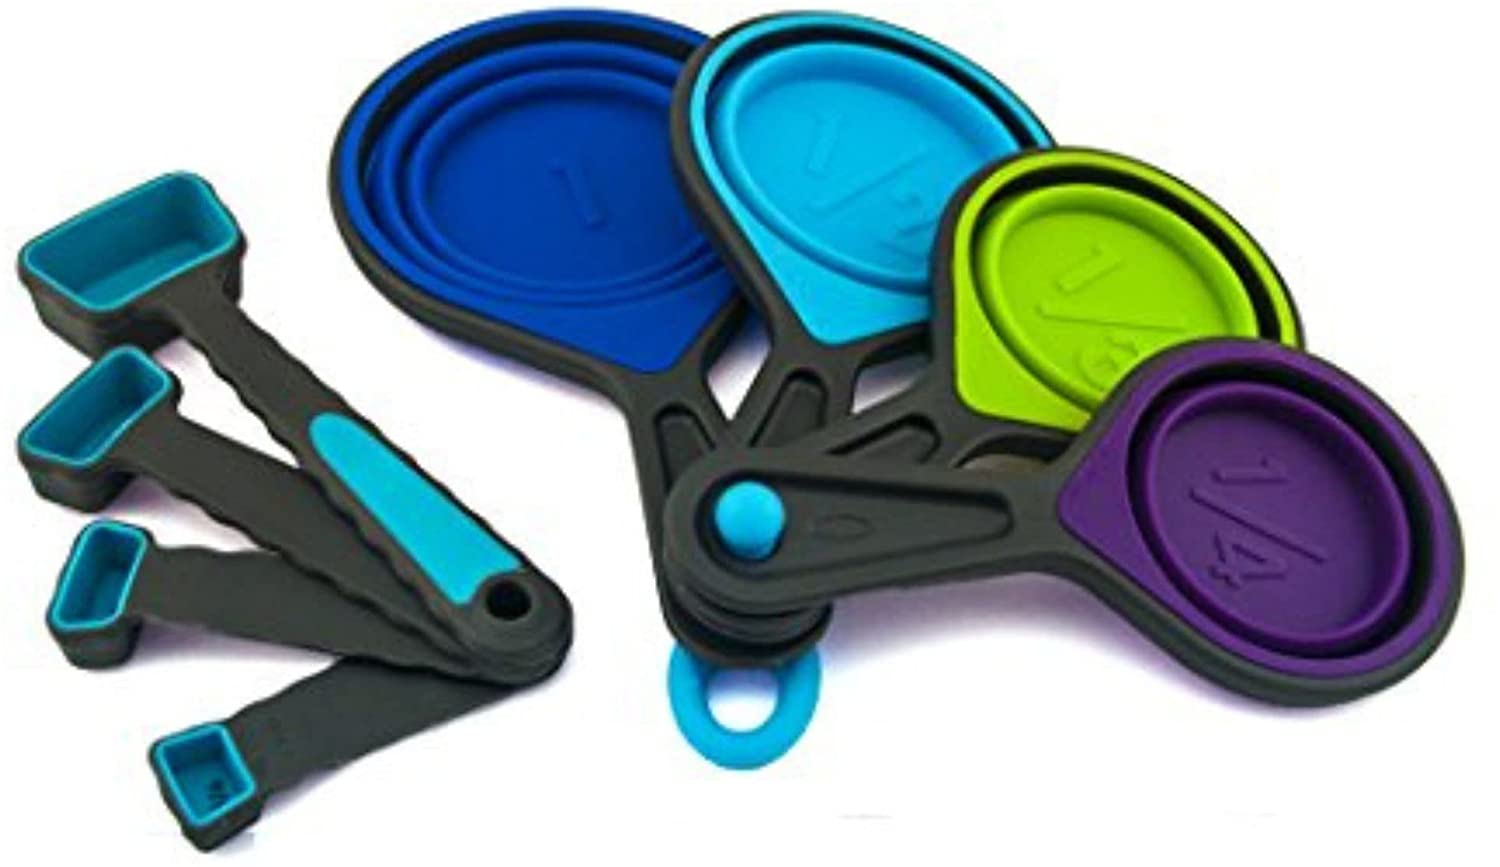 Collapsible measuring cups and spoons on Amazon